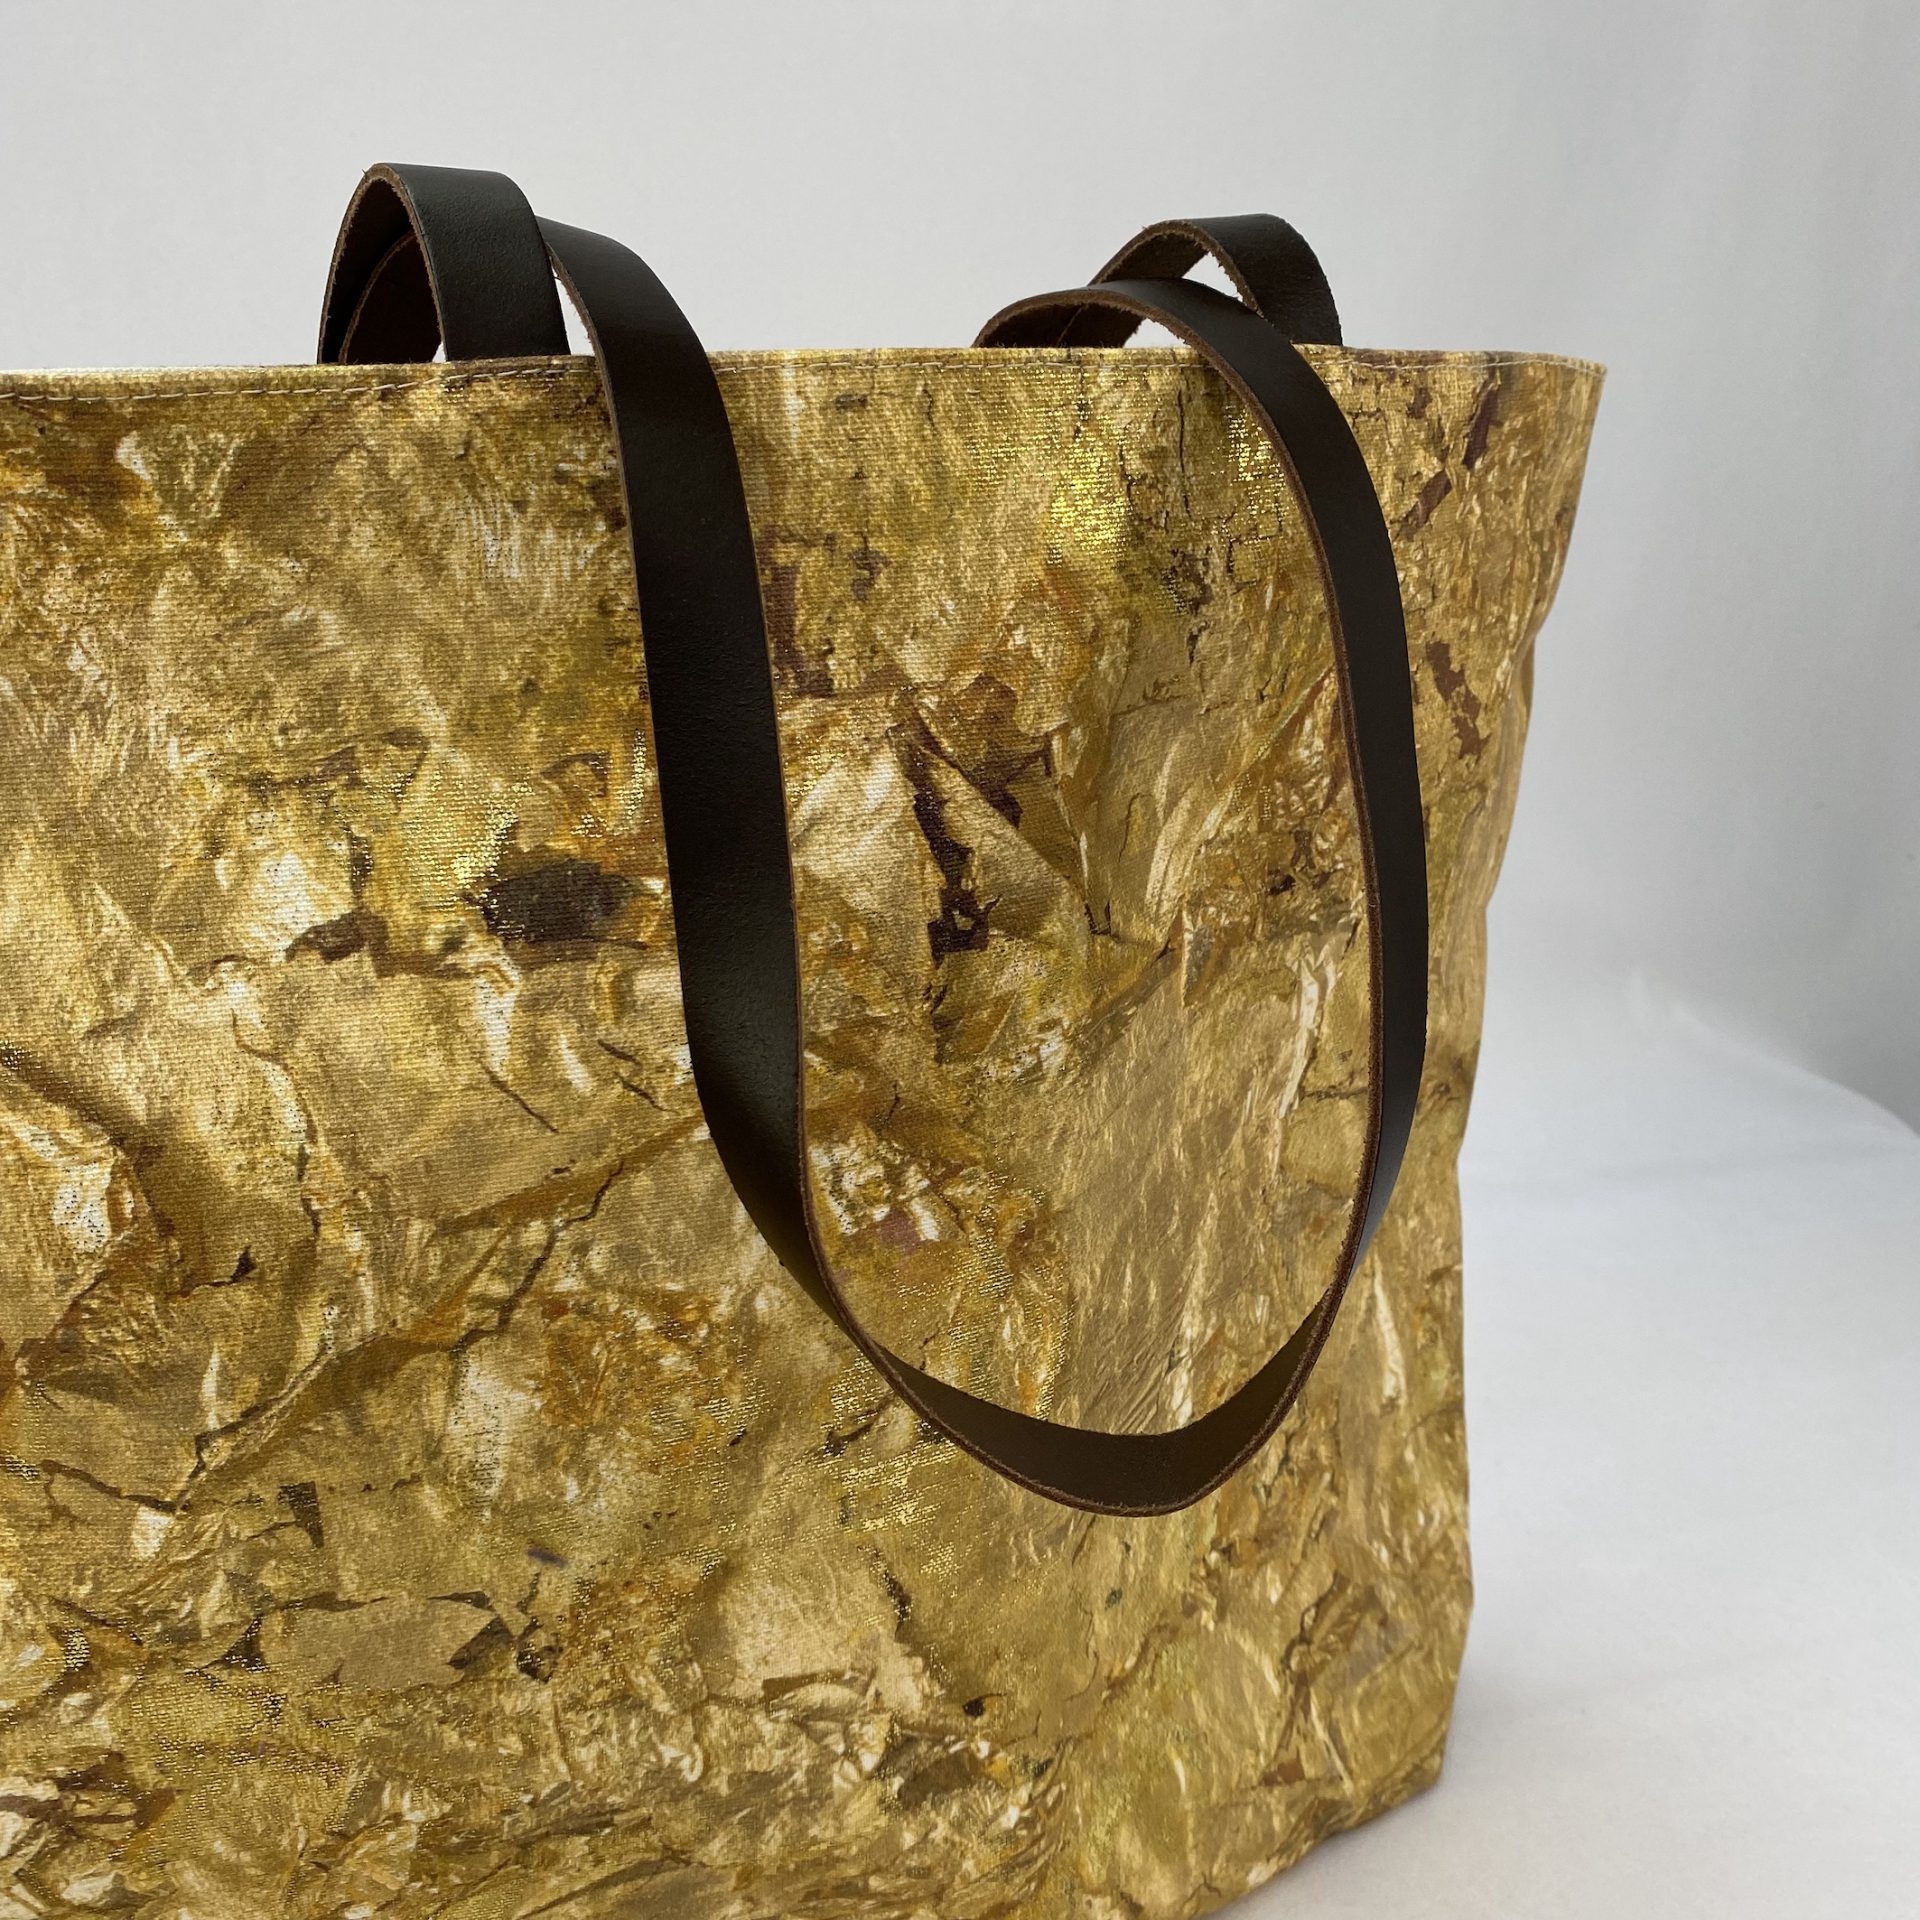 Innovative gold foil printing onto a digitally printed tote bag of a Rauschenberg artwork for the Tate